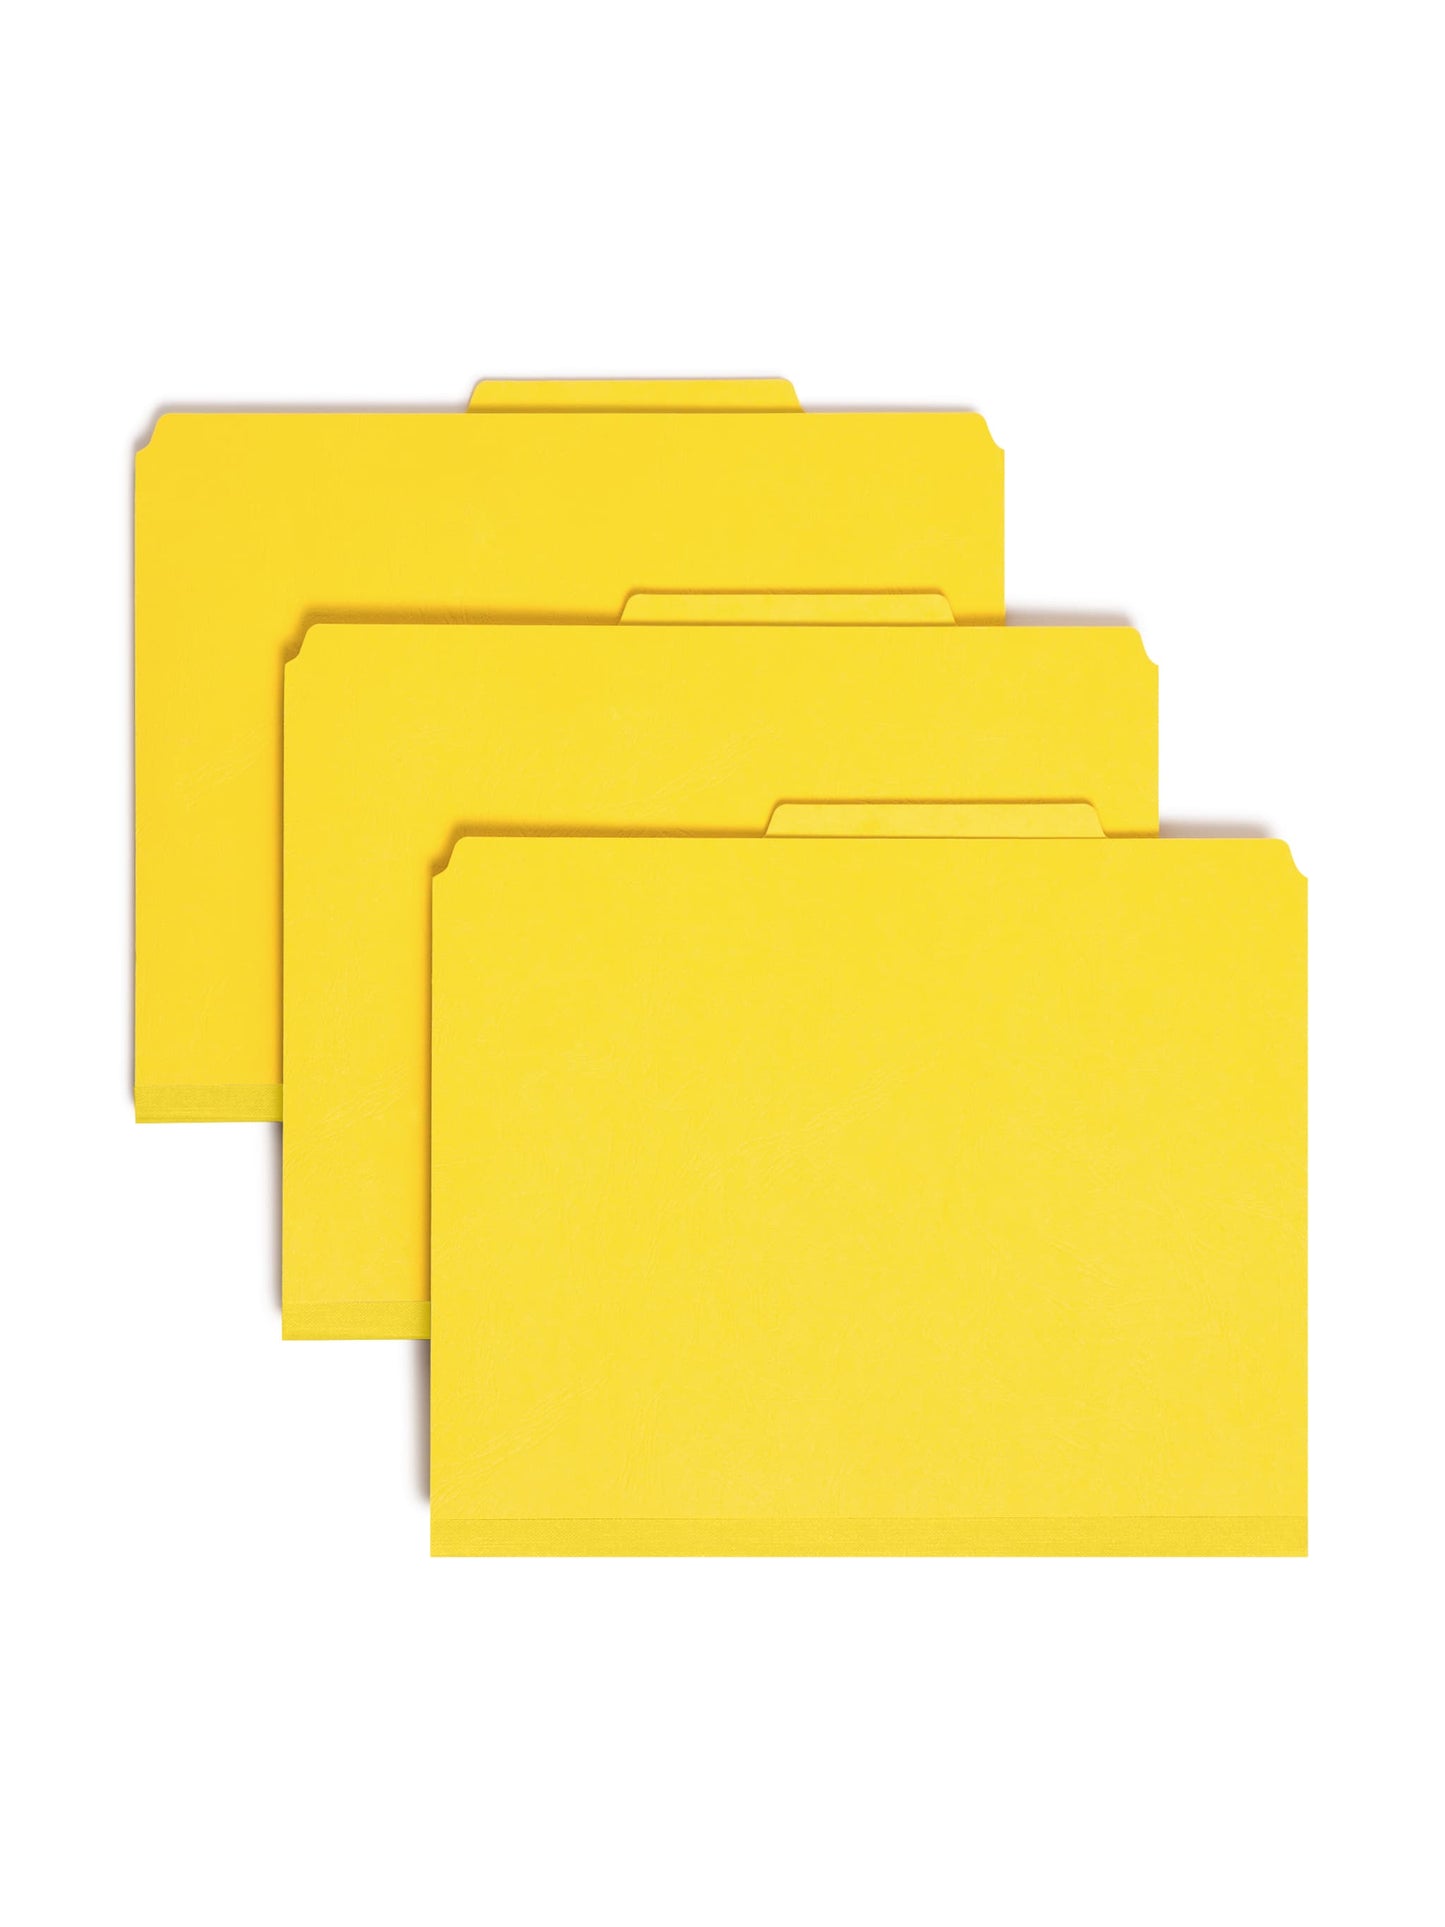 SafeSHIELD® Premium Pressboard Classification File Folders, 2 Dividers, 2 inch Expansion, 2/5-Cut Tab, Yellow Color, Letter Size, Set of 0, 30086486142039